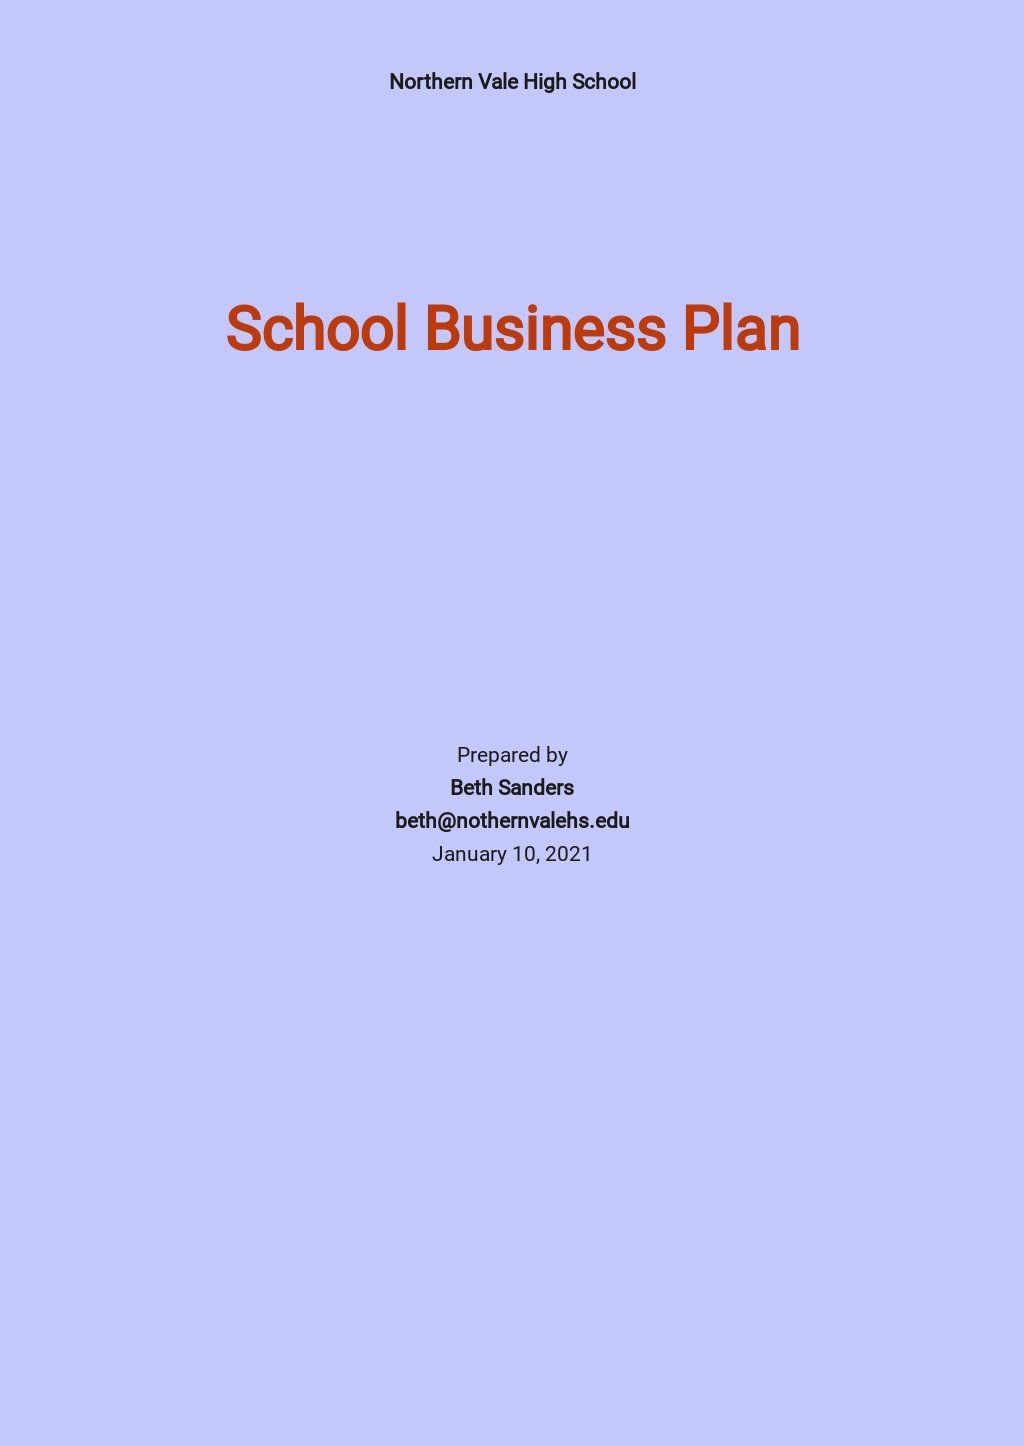 simple business plan template free download